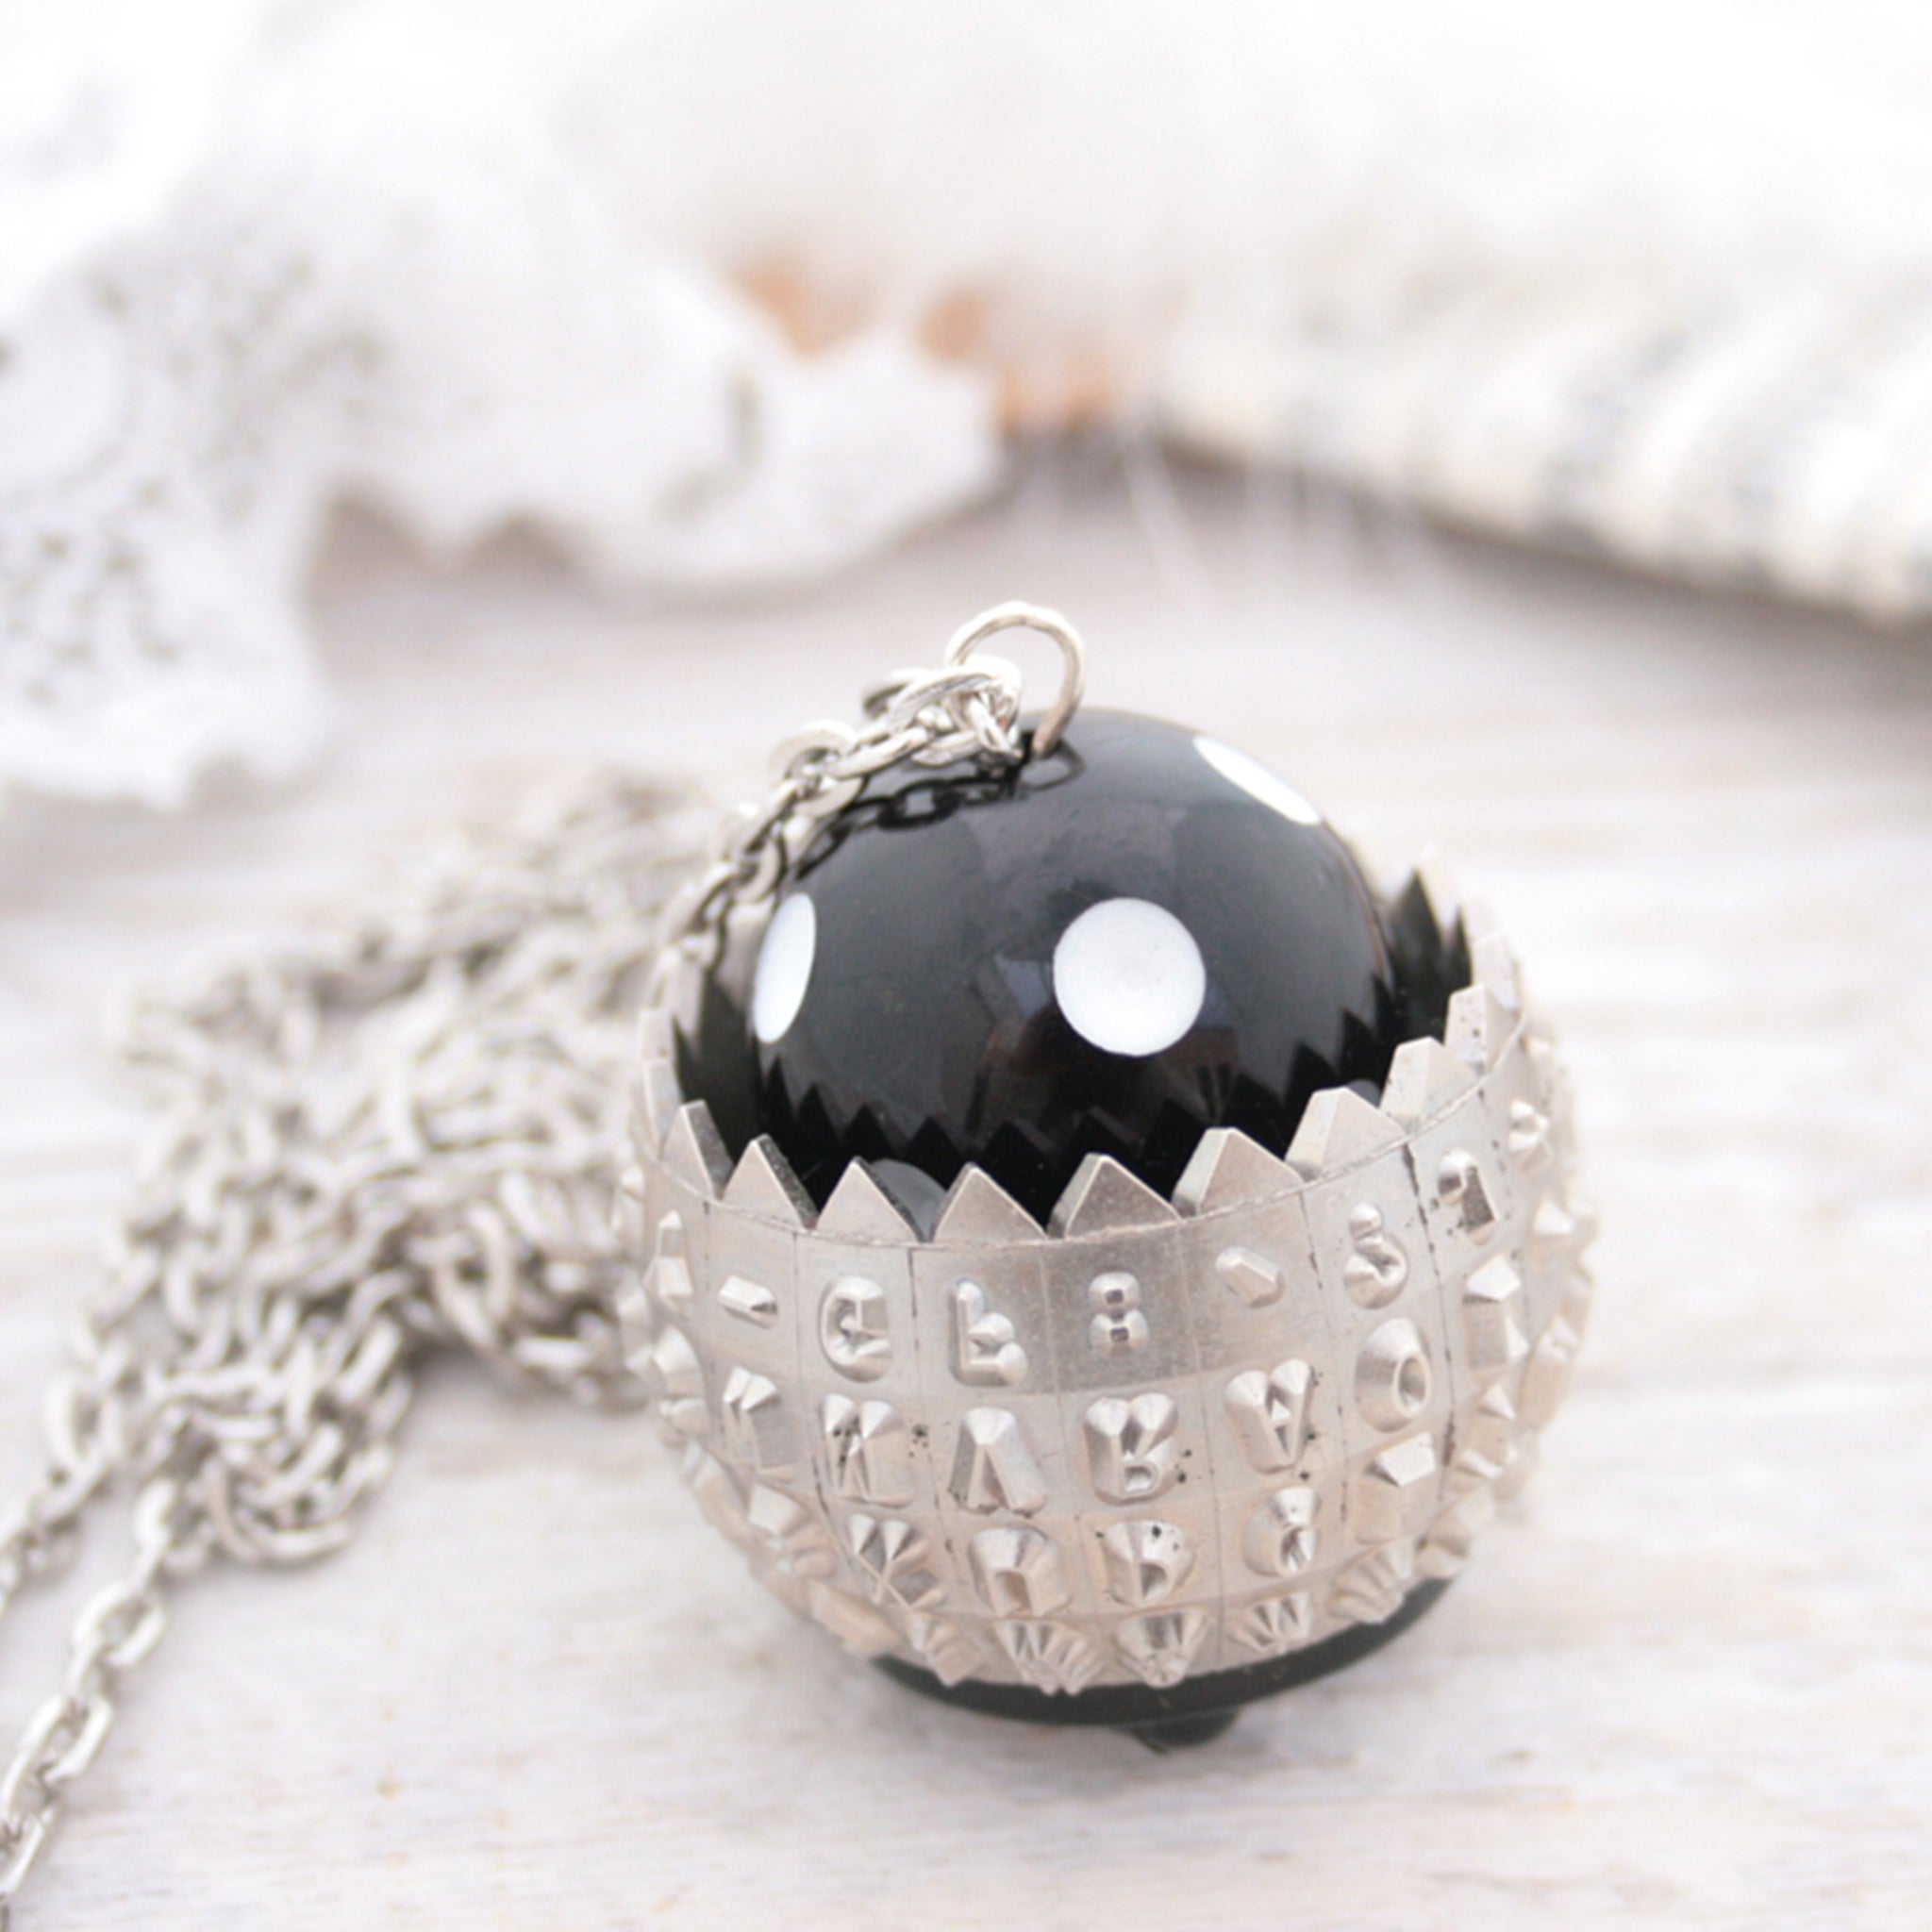  IBM Selectric typewriter font ball with large black and white bead turned into a necklace